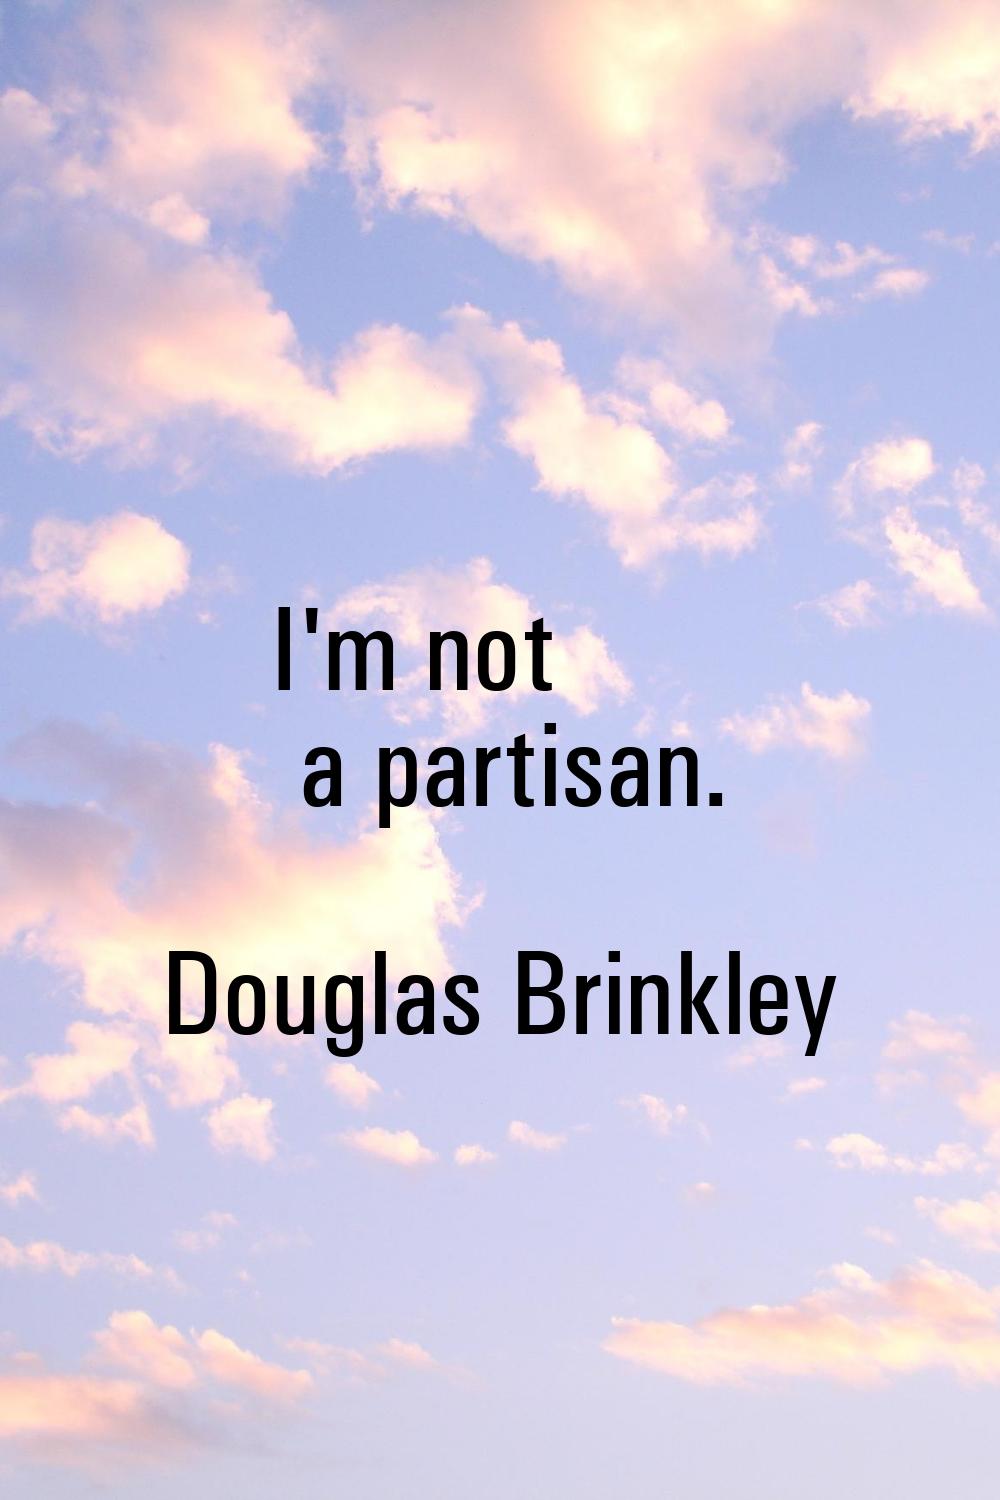 I'm not a partisan.